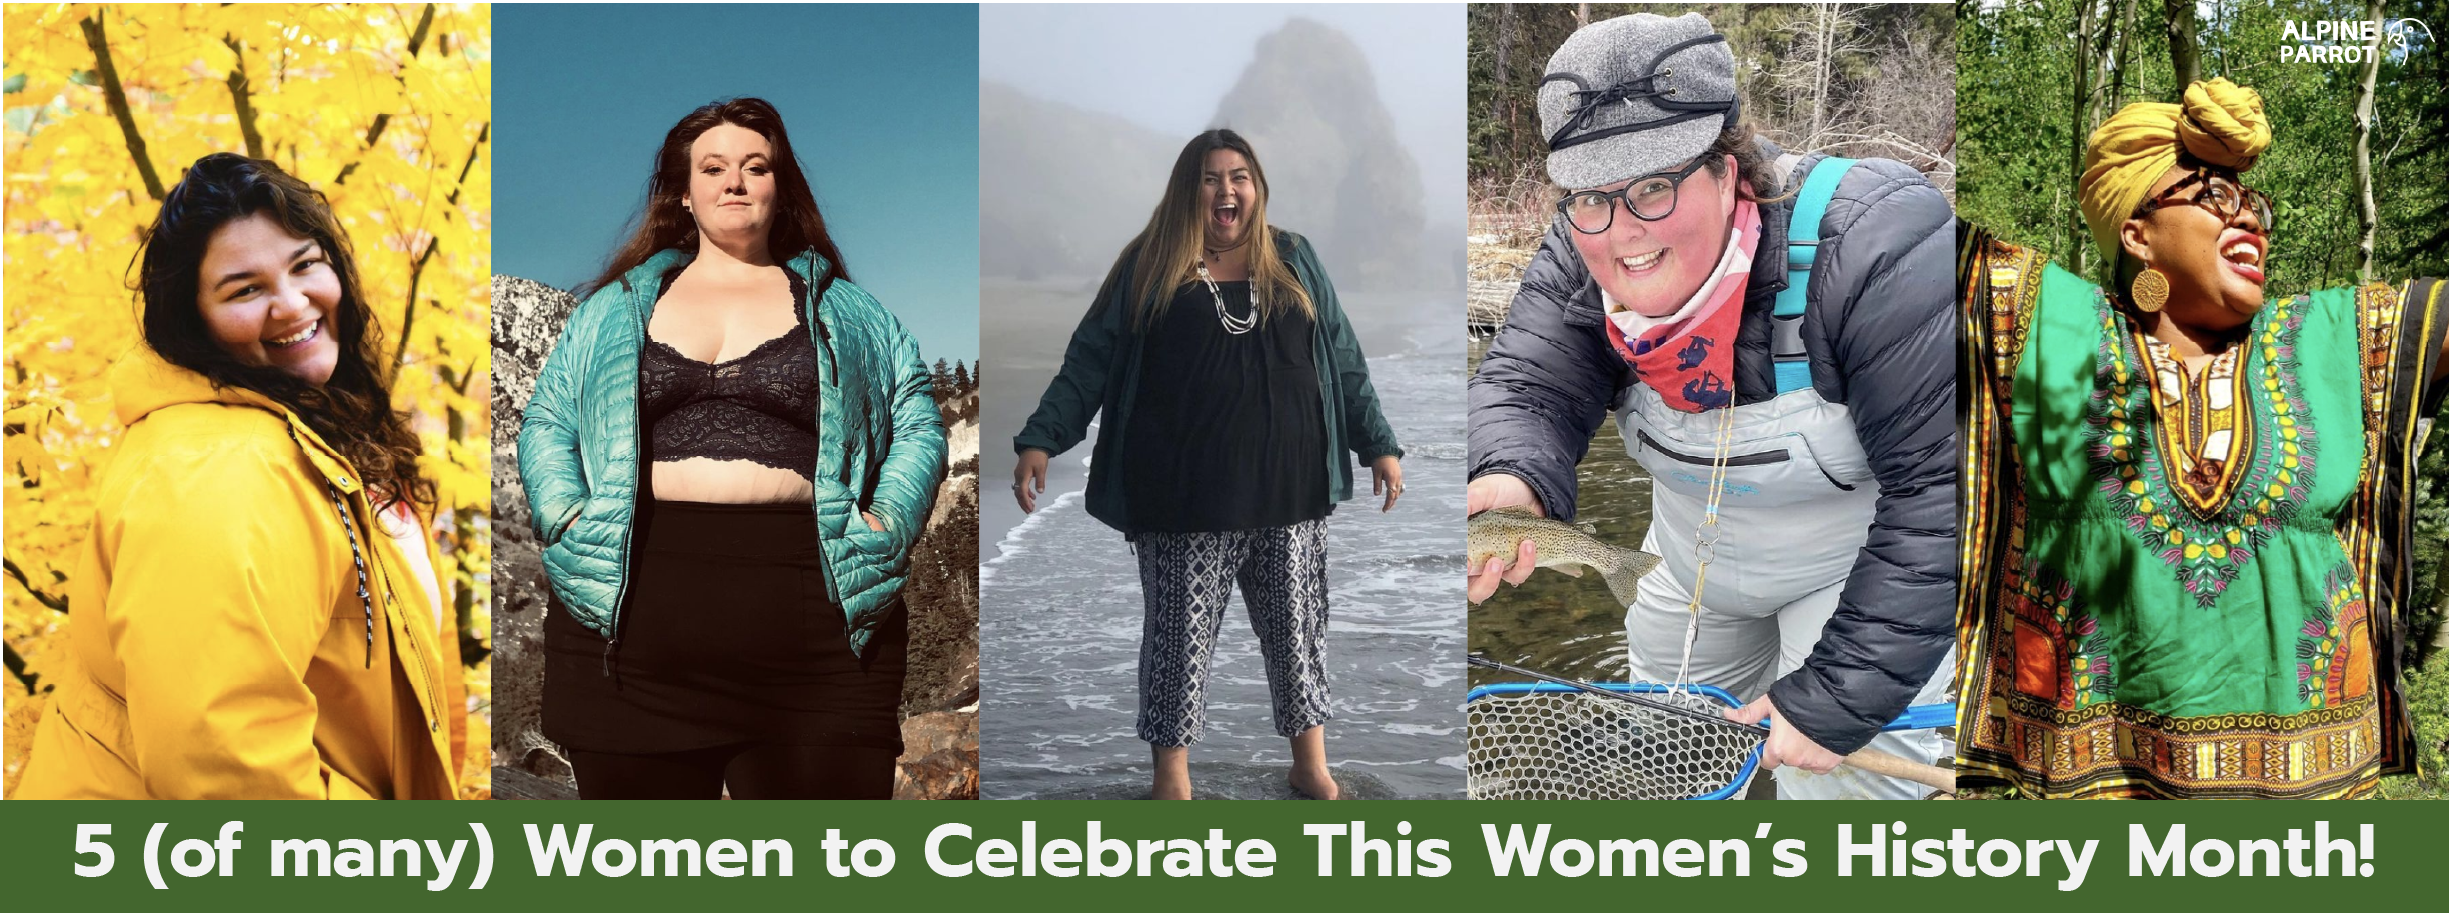 5 Women To Celebrate This Women's History Month